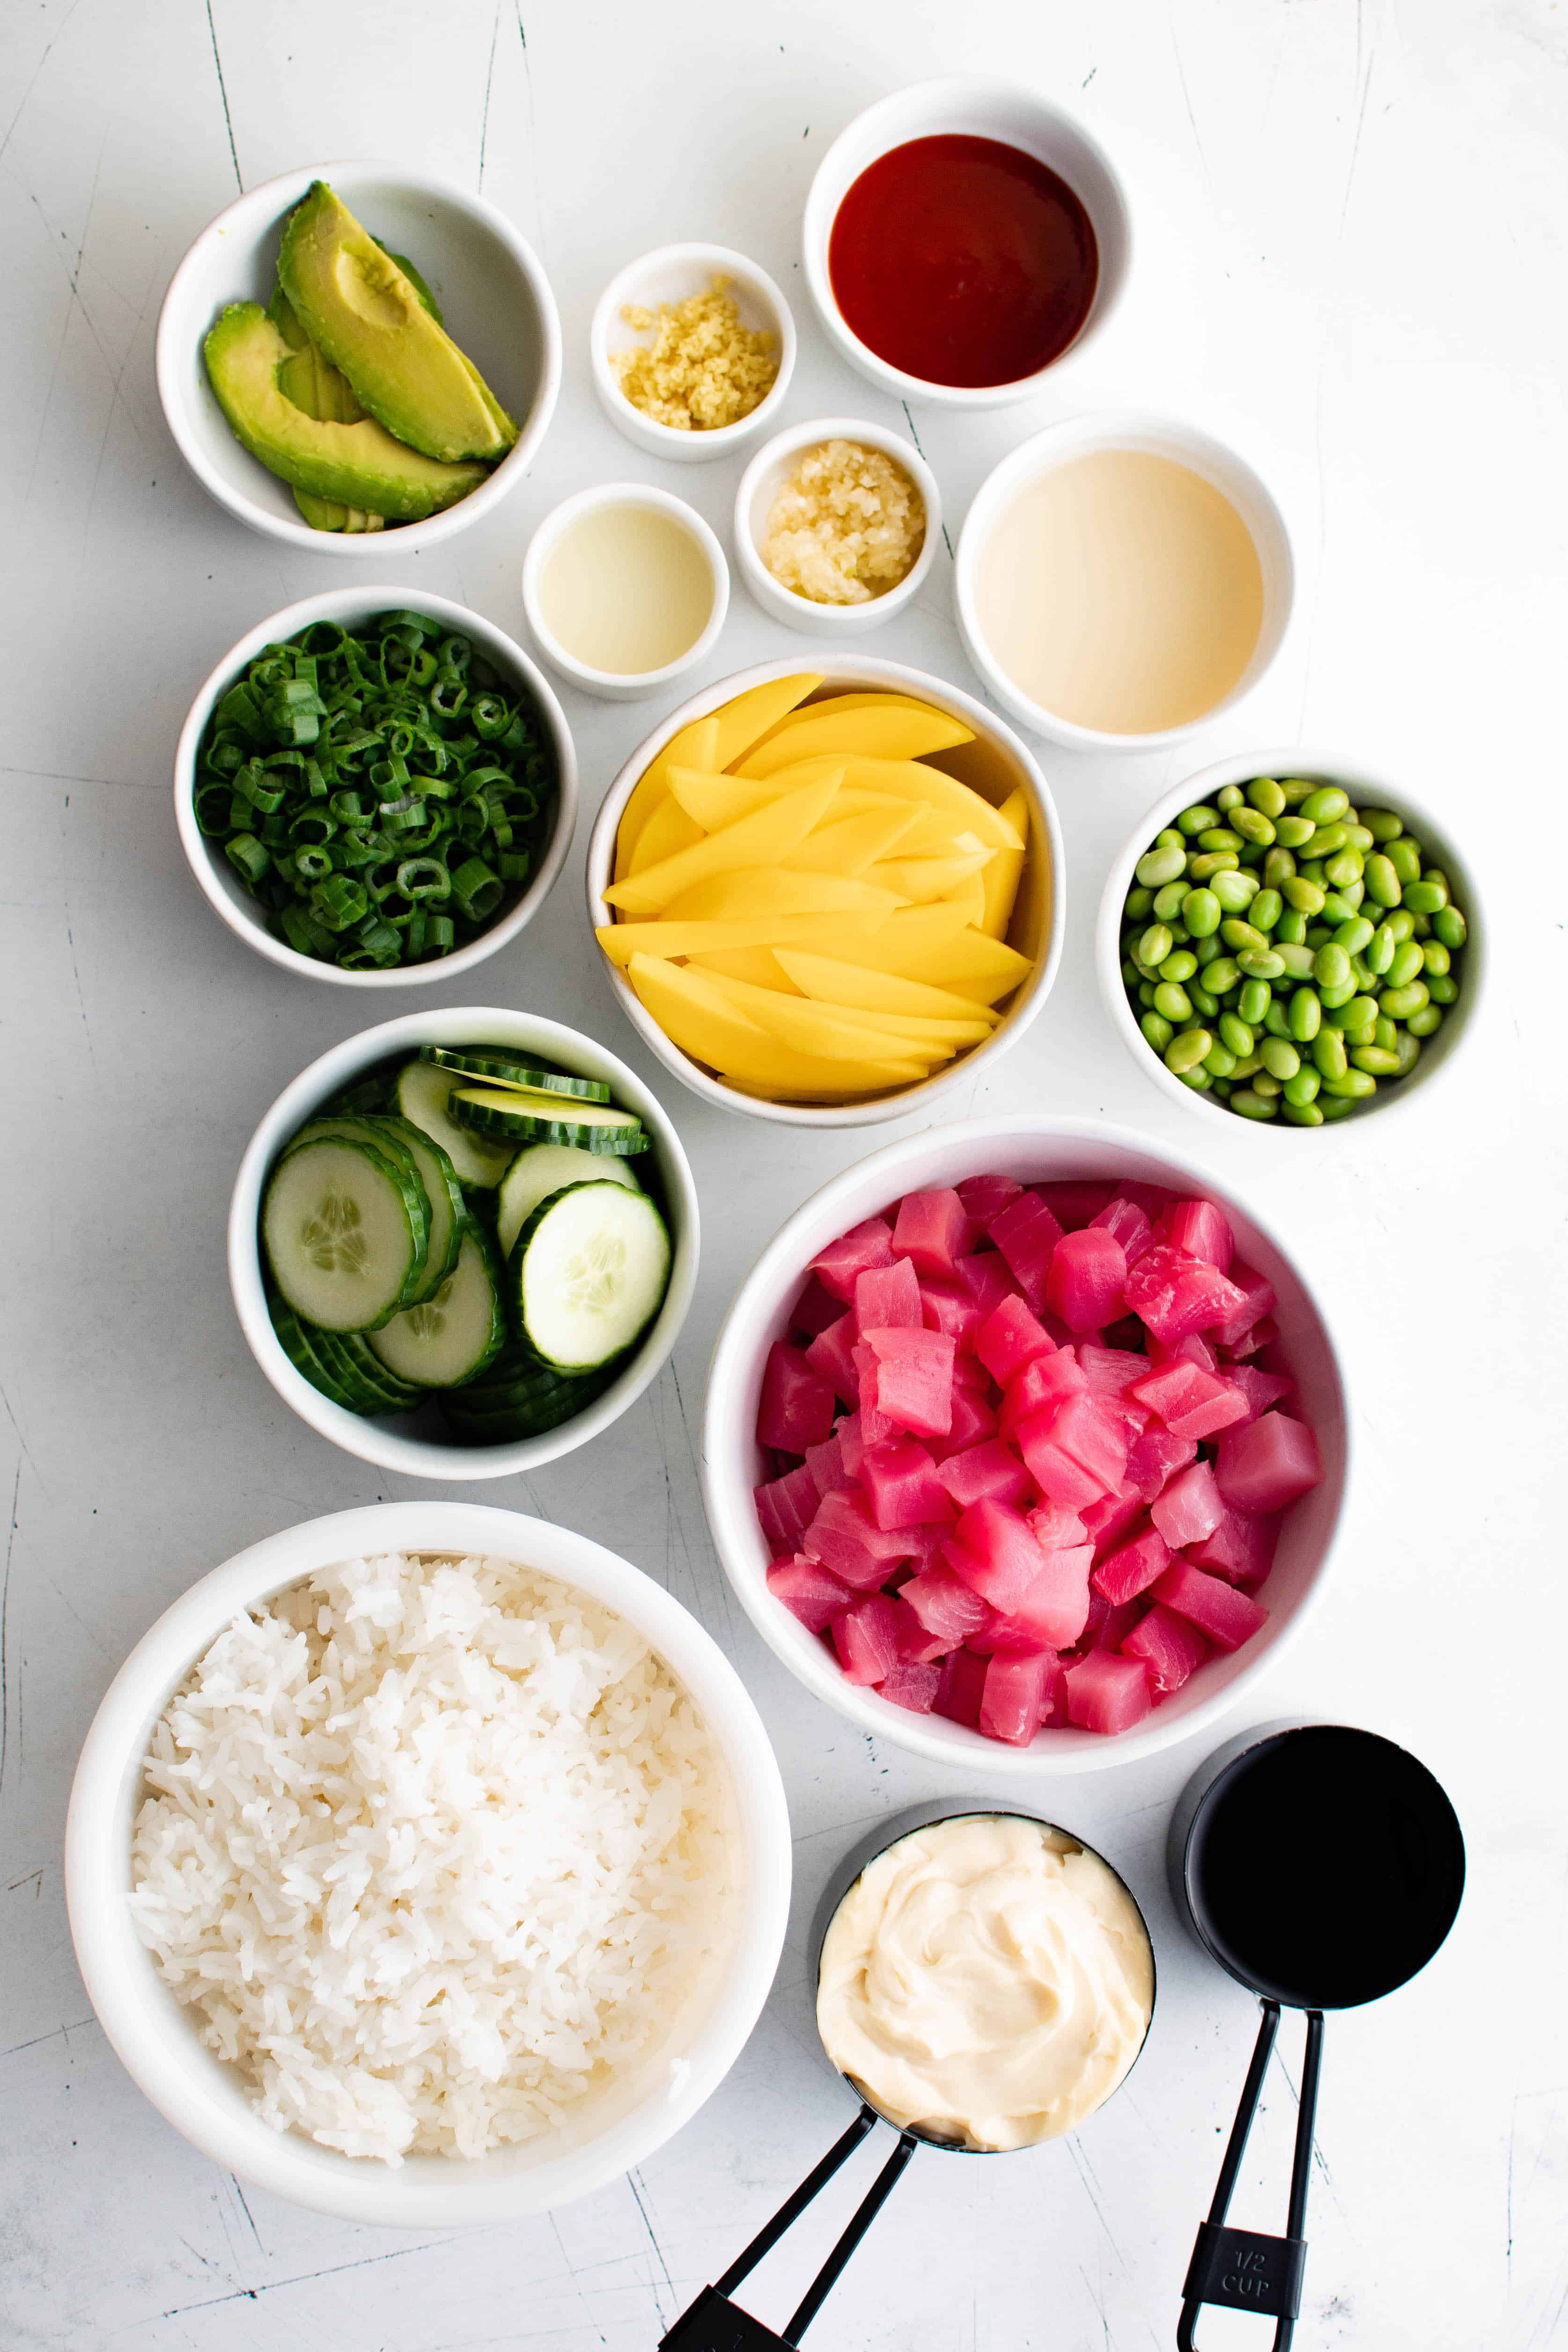 All of the ingredients in separate individual bowls and dishes to make poke bowls.